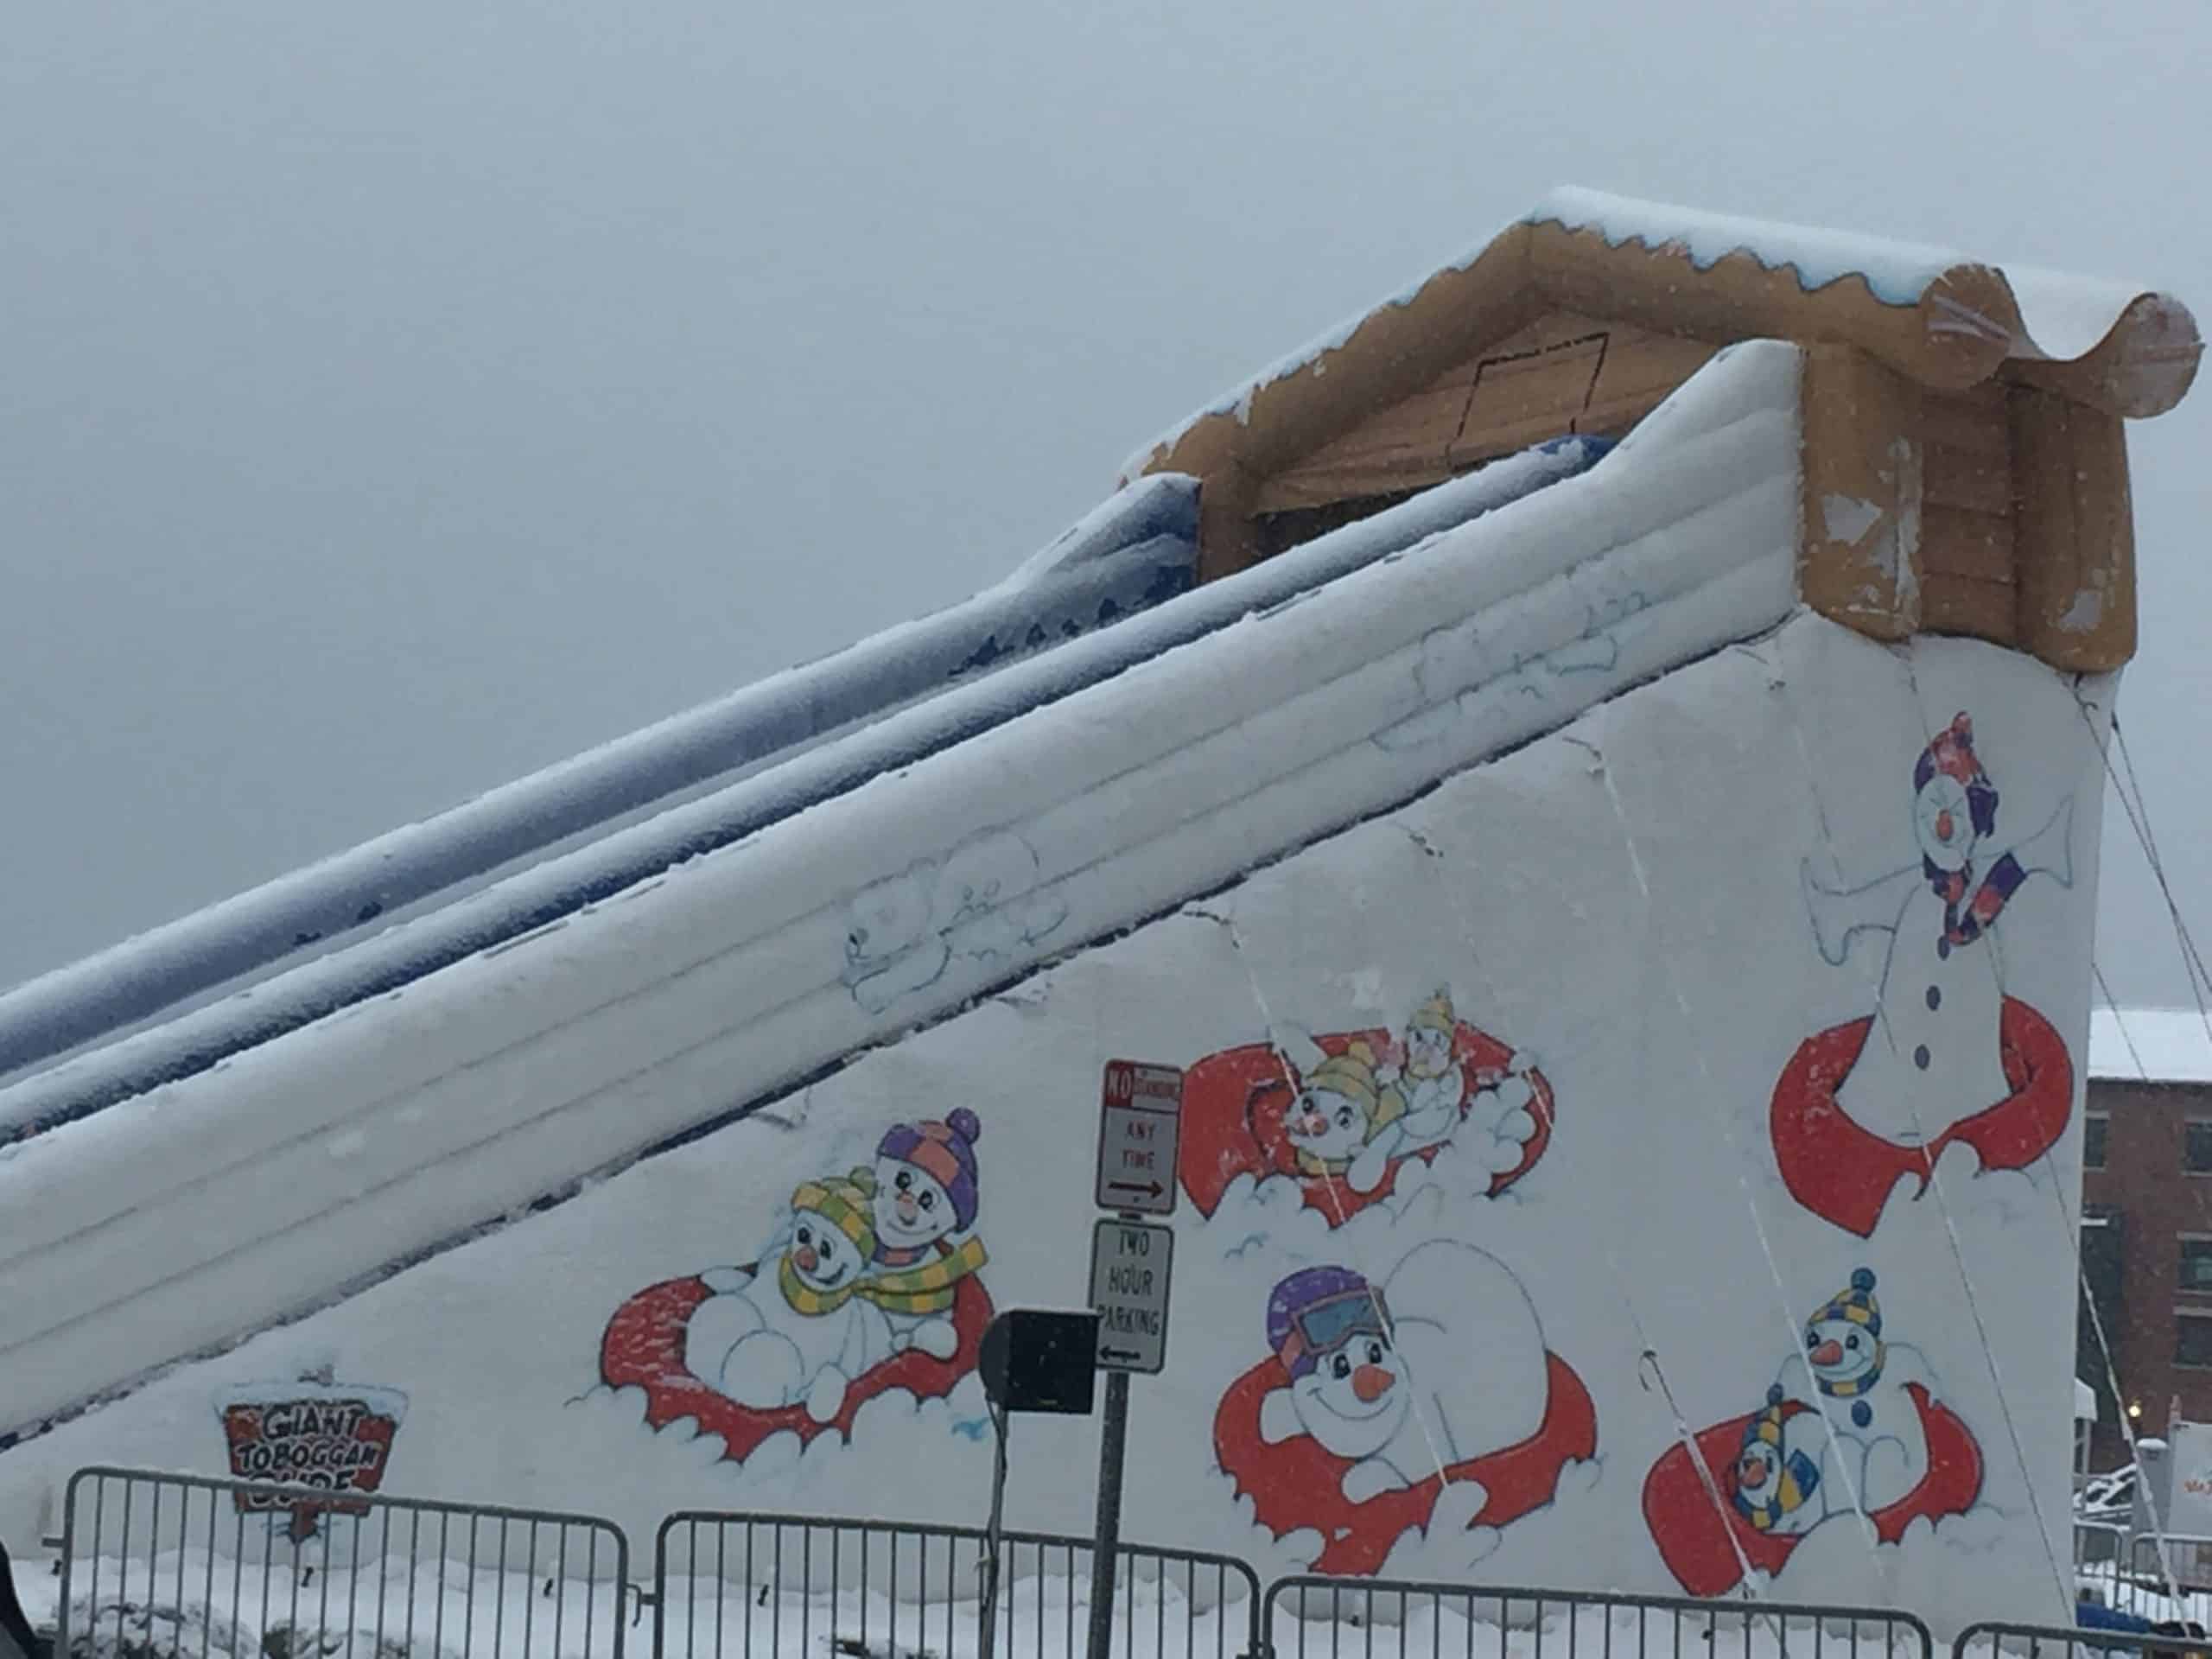 Canalside transforms into winter wonderland for World Junior Championships – including 40 foot slide – and it’s free, folks!